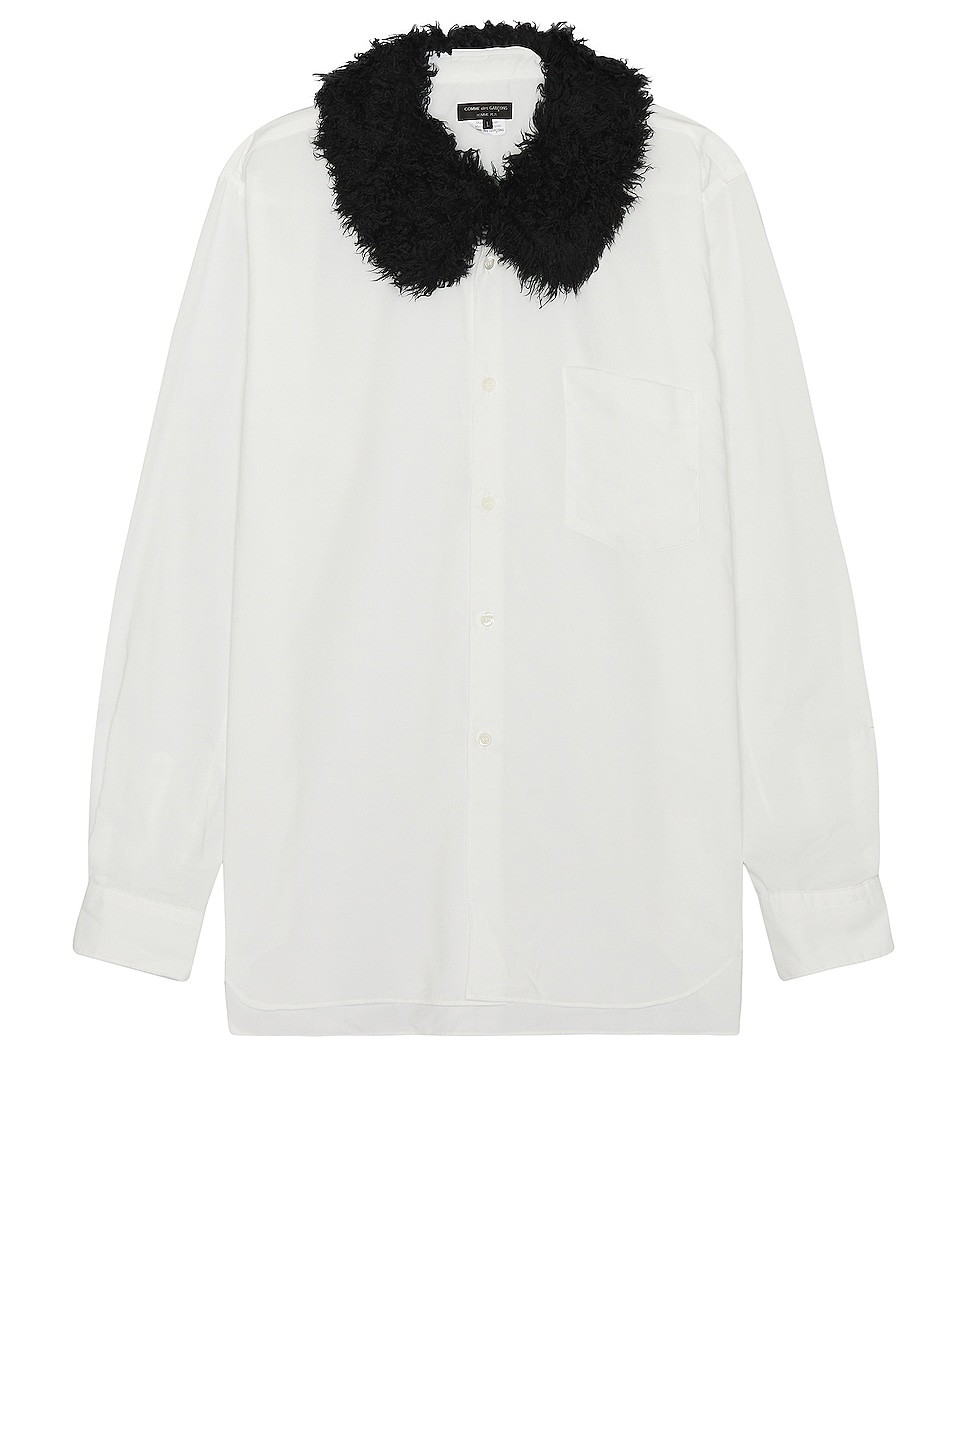 Image 1 of COMME des GARCONS Homme Plus Broad Shirt in White & Black